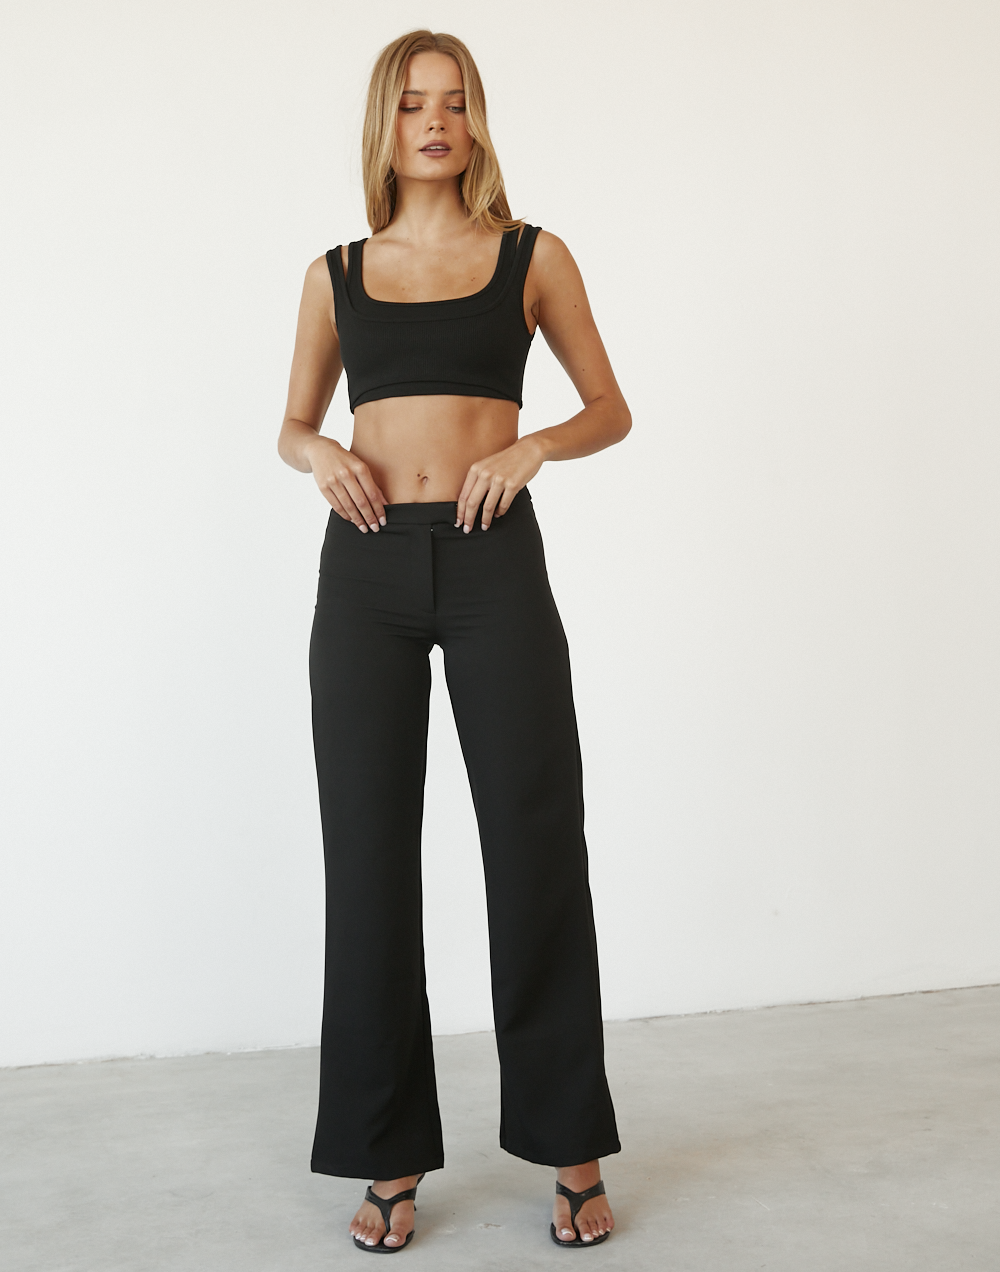 Kemble Crop Top (Black) - Double Layered Crop Top - Women's Top - Charcoal Clothing